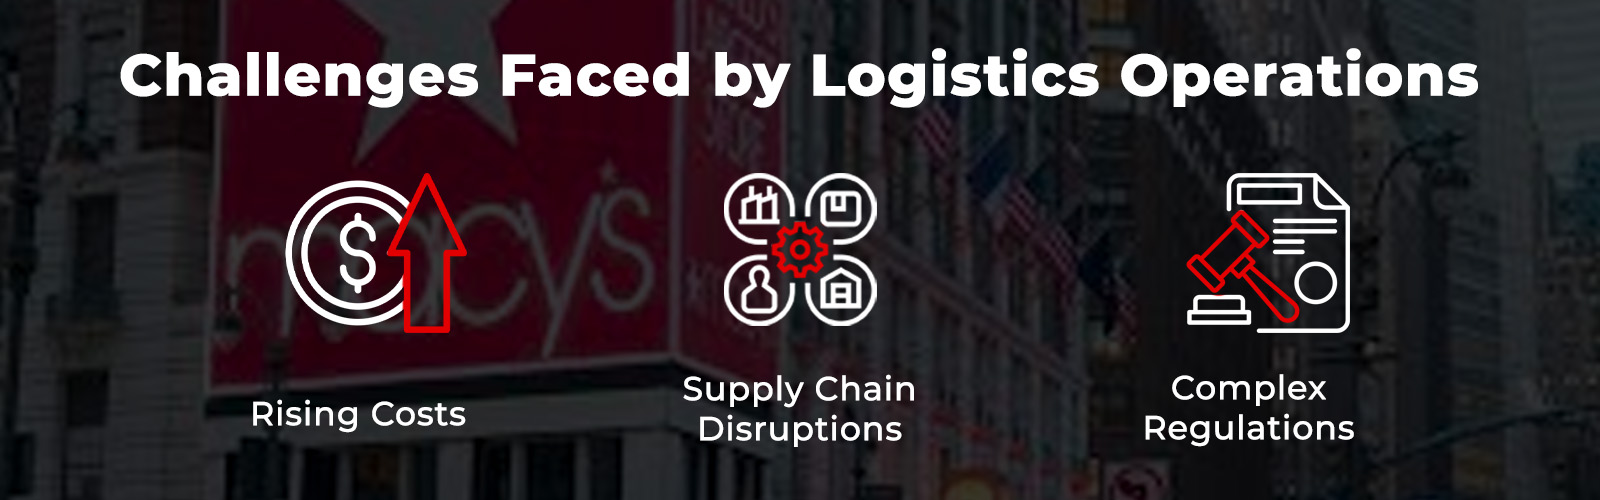 Challenges Faced by Logistics Operations